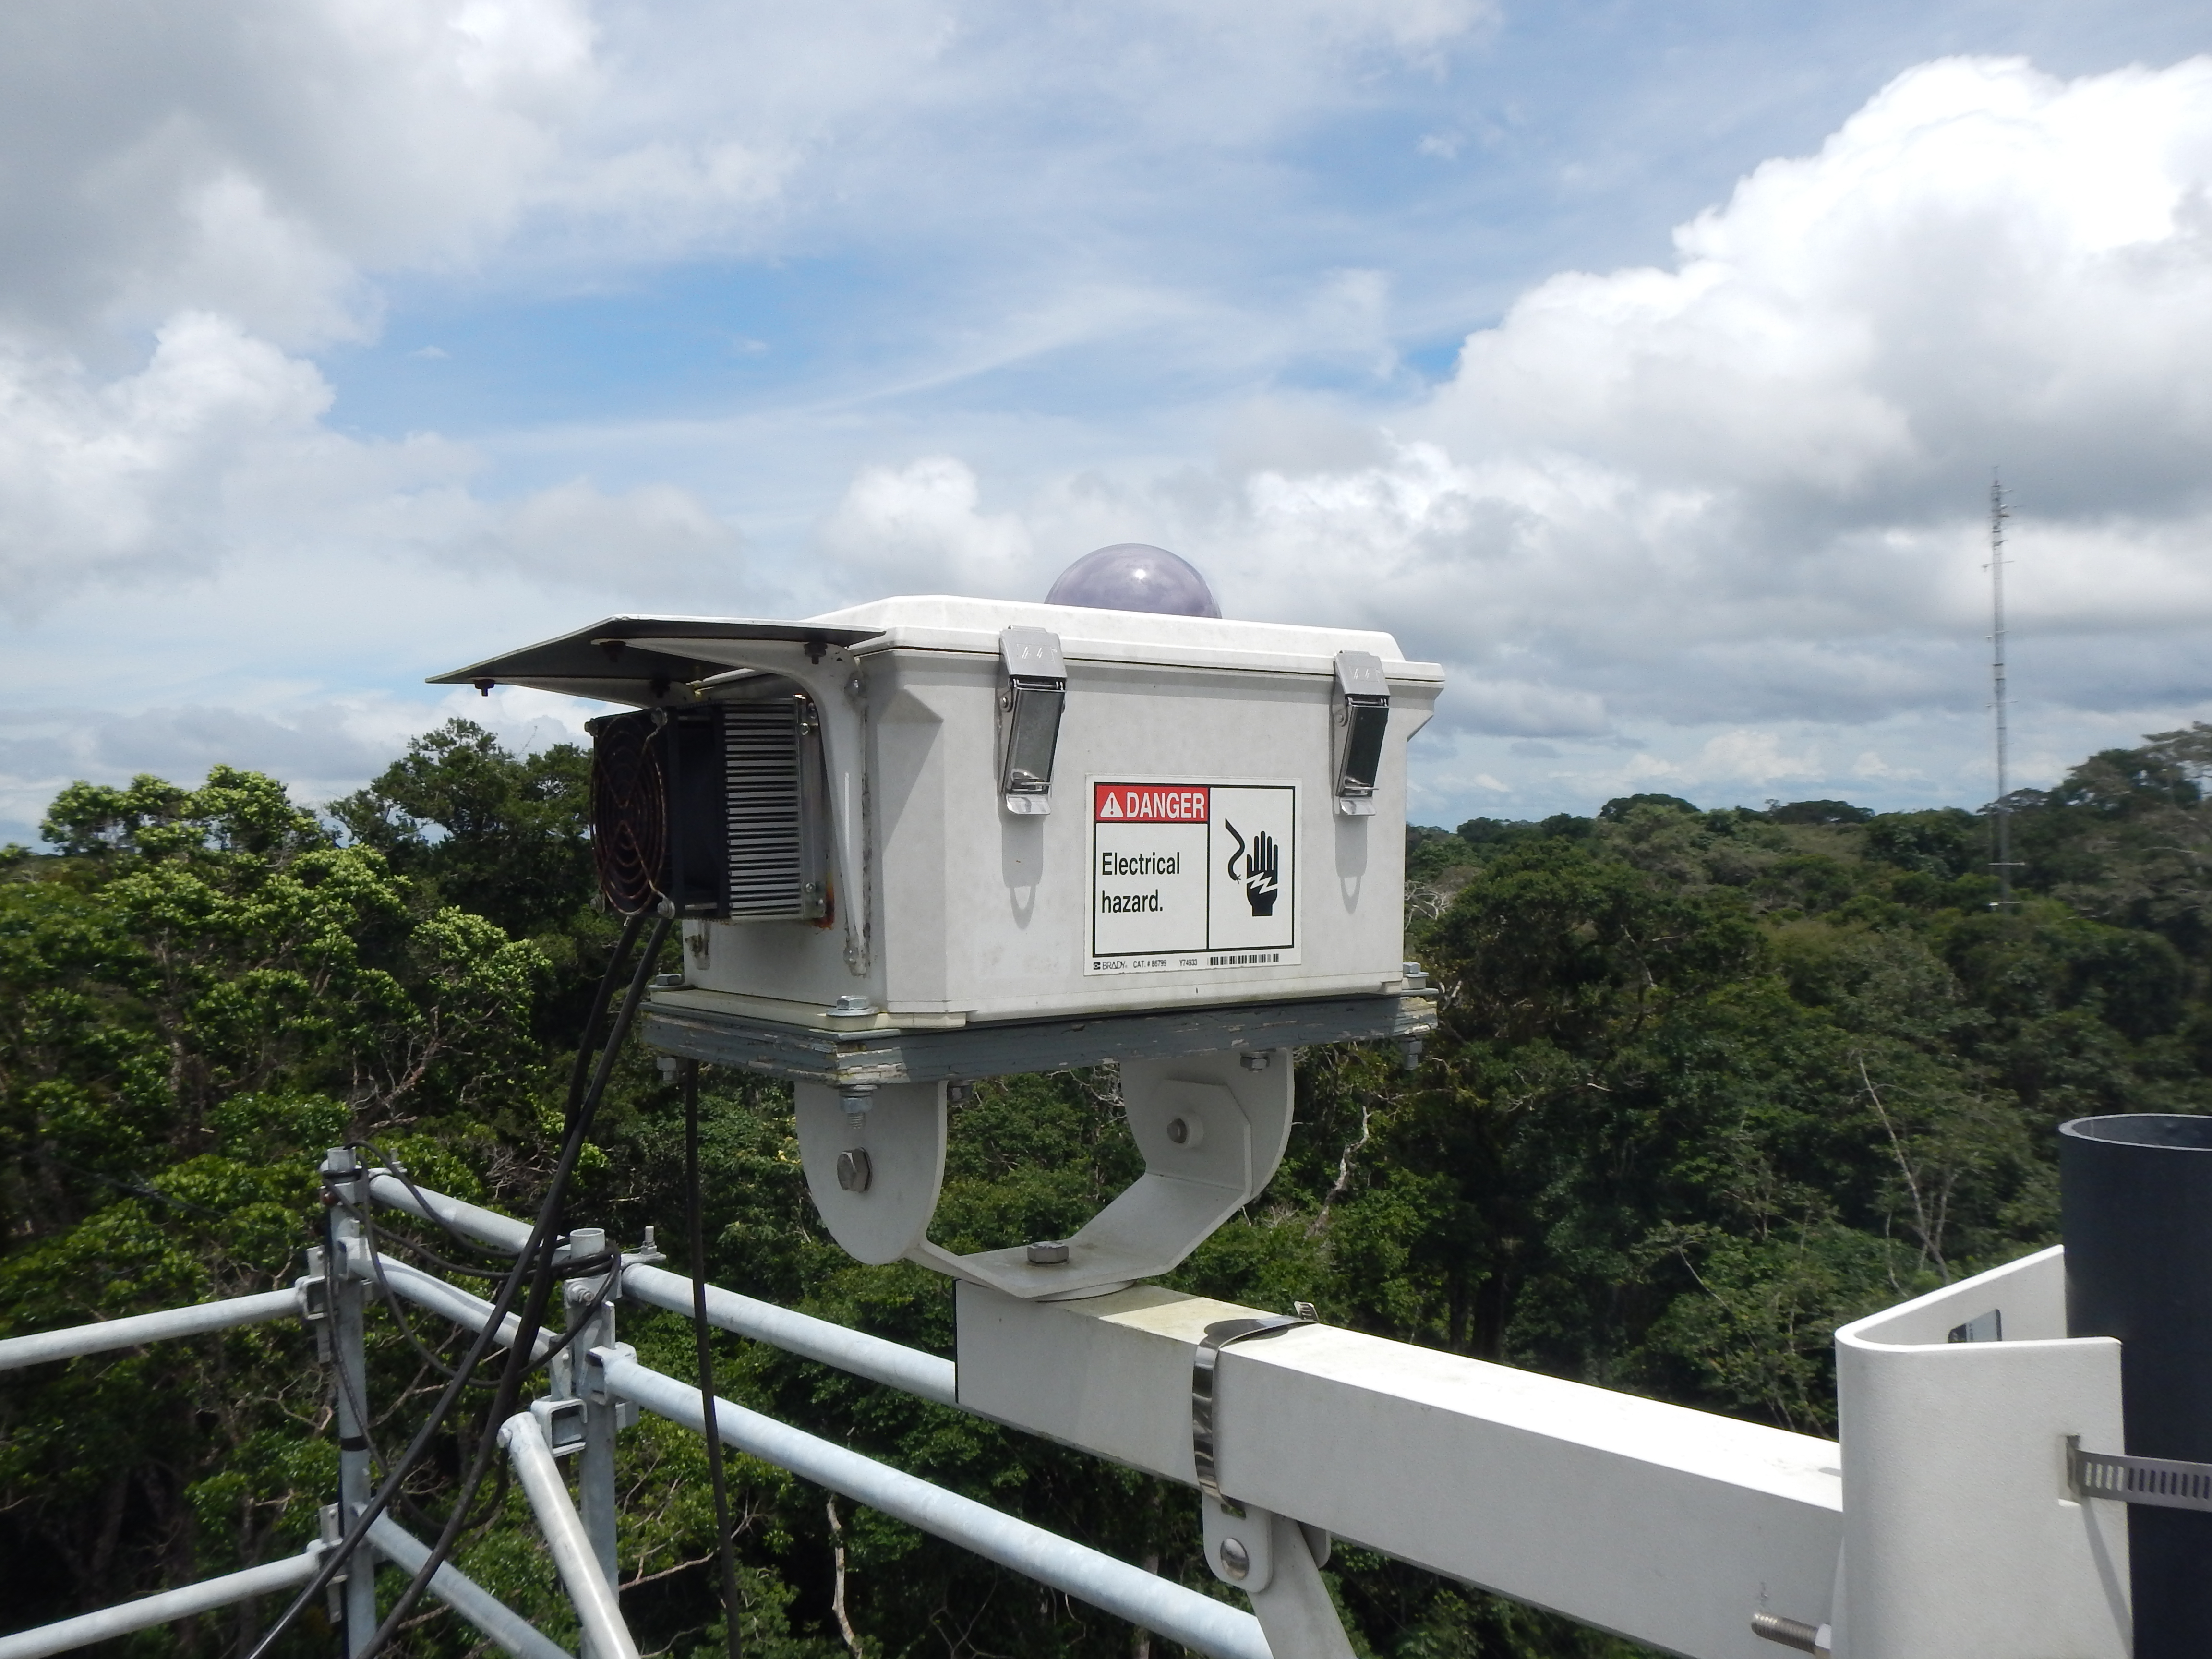 The USGS High Dynamic Range All-Sky Imaging System (HDR-ASIS) measures the sky distribution of solar radiation at a study site near Santarem, Brazil.  Data from this and other tower-based remote sensing instruments are helping USGS scientists and their collaborators develop improved capabilities to account for the role of tropical forests in the global climate system